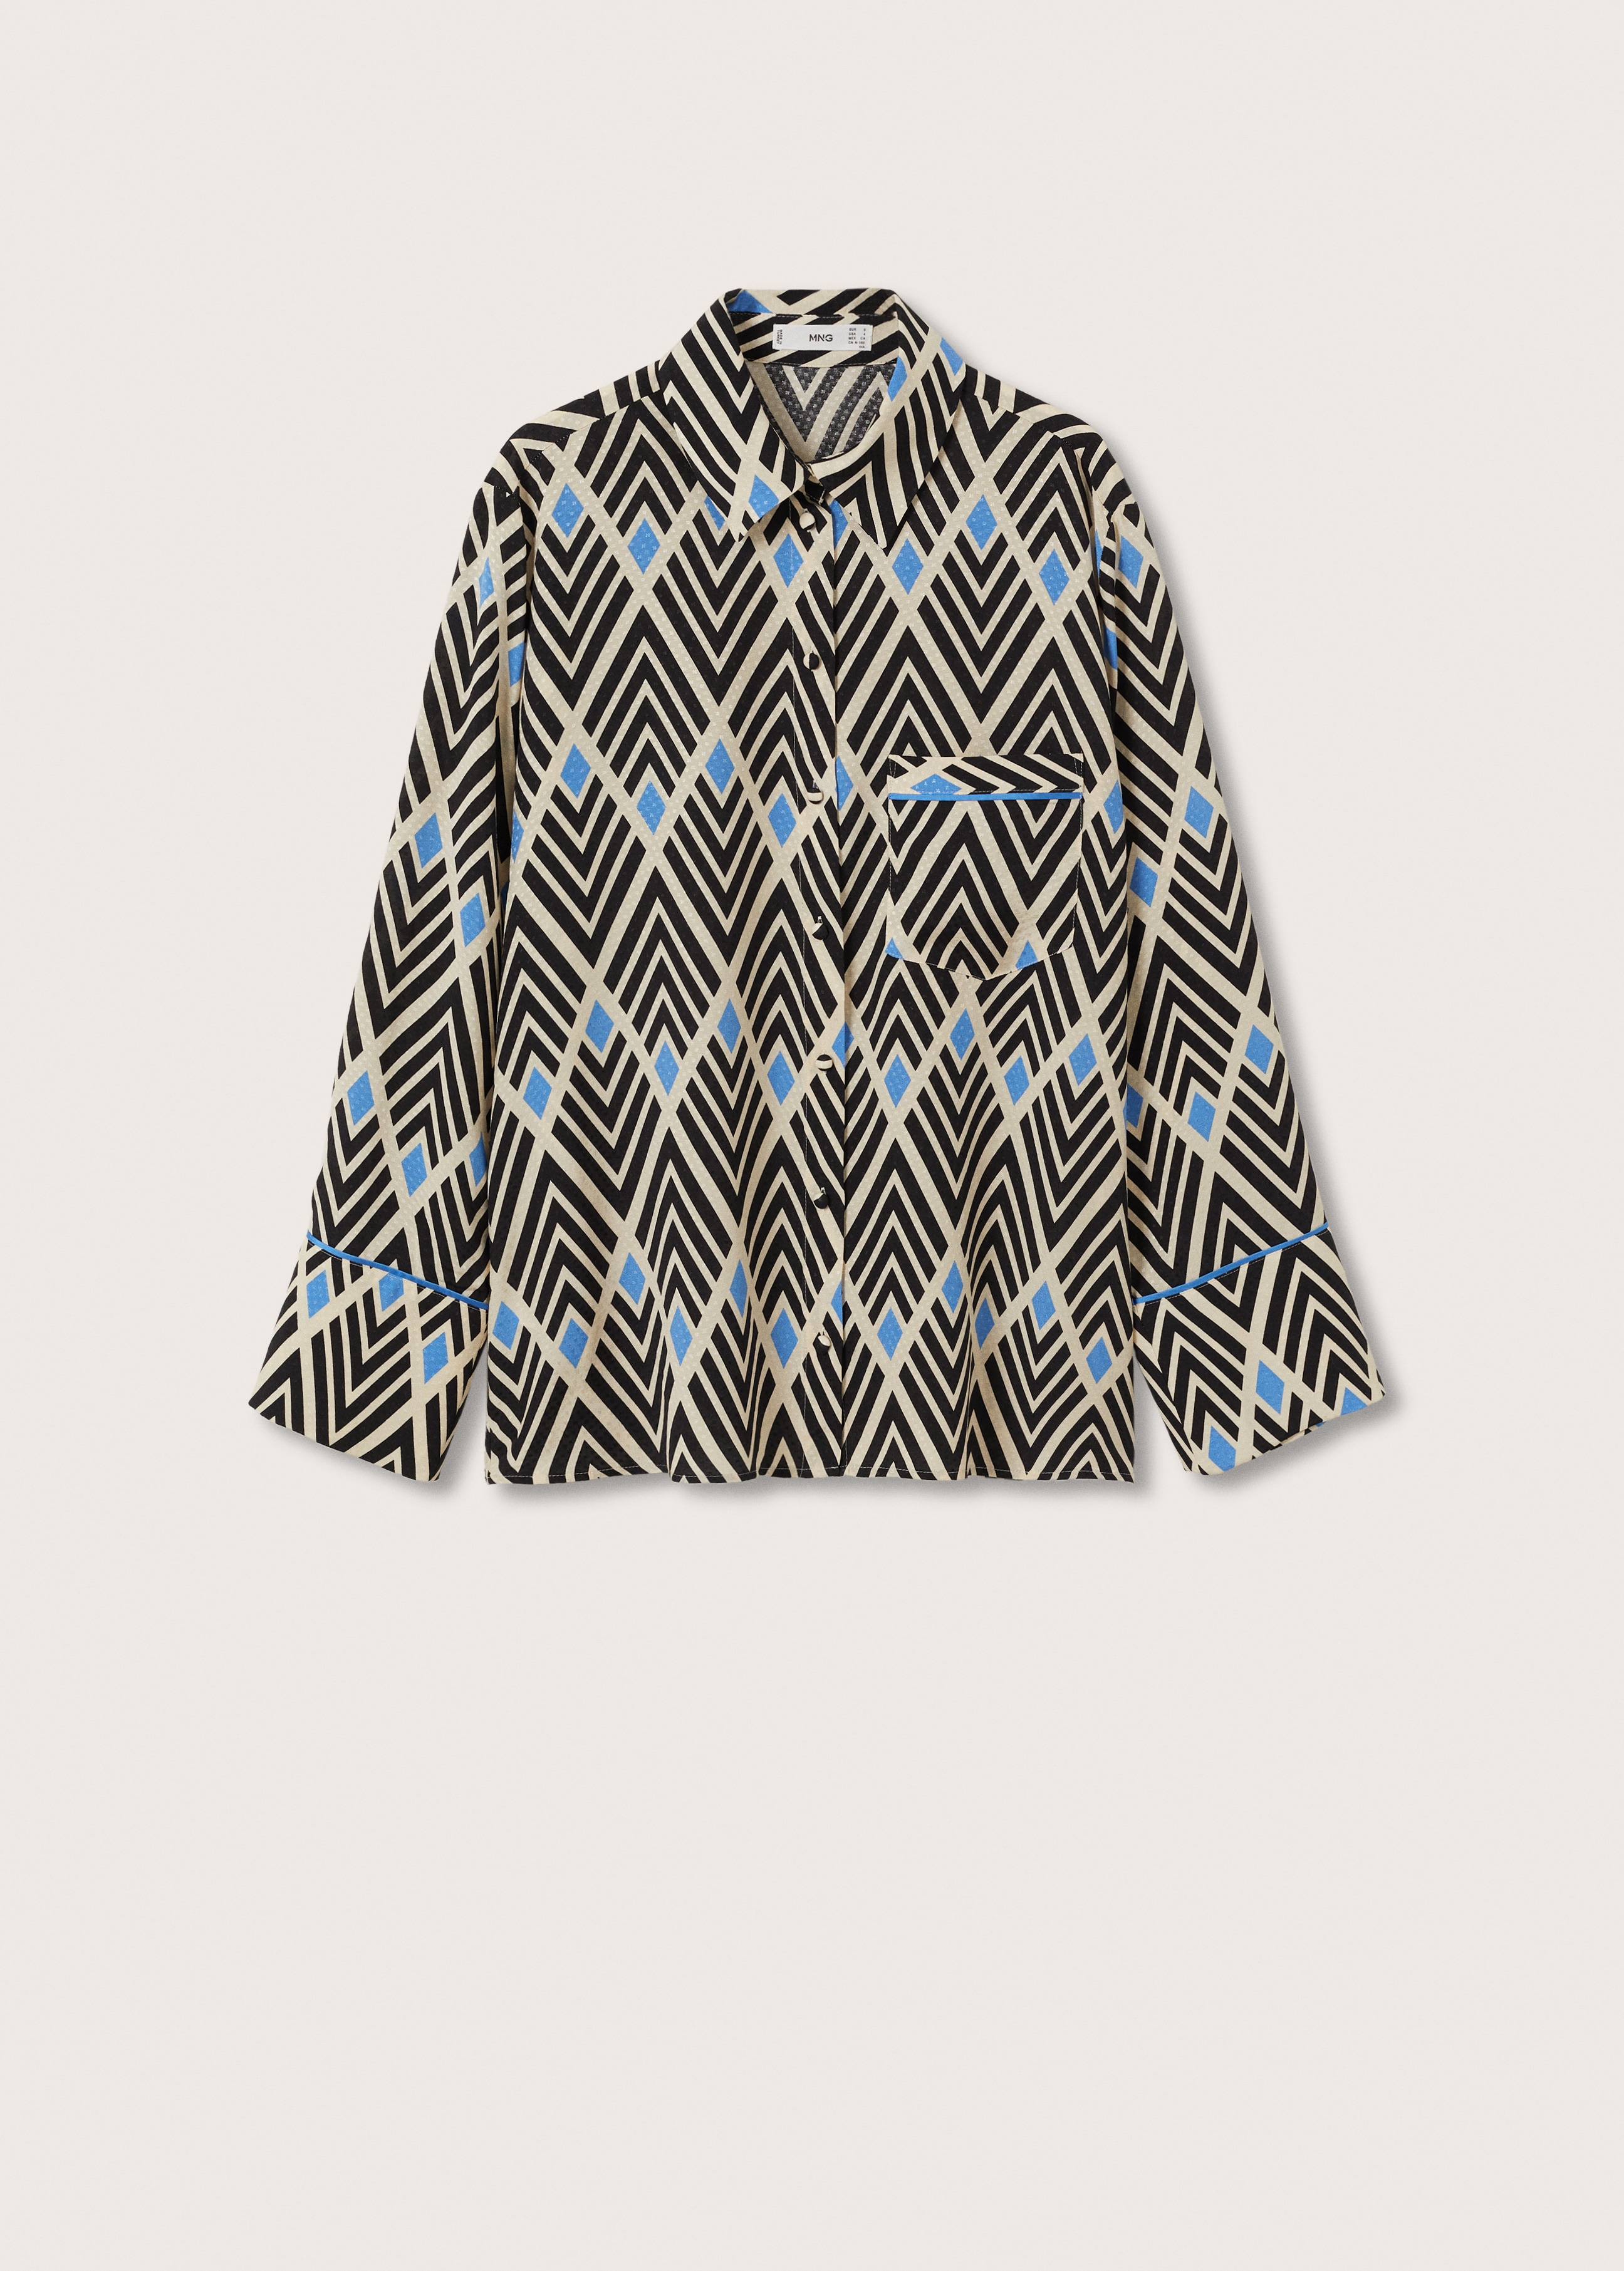 Geometric print shirt - Article without model